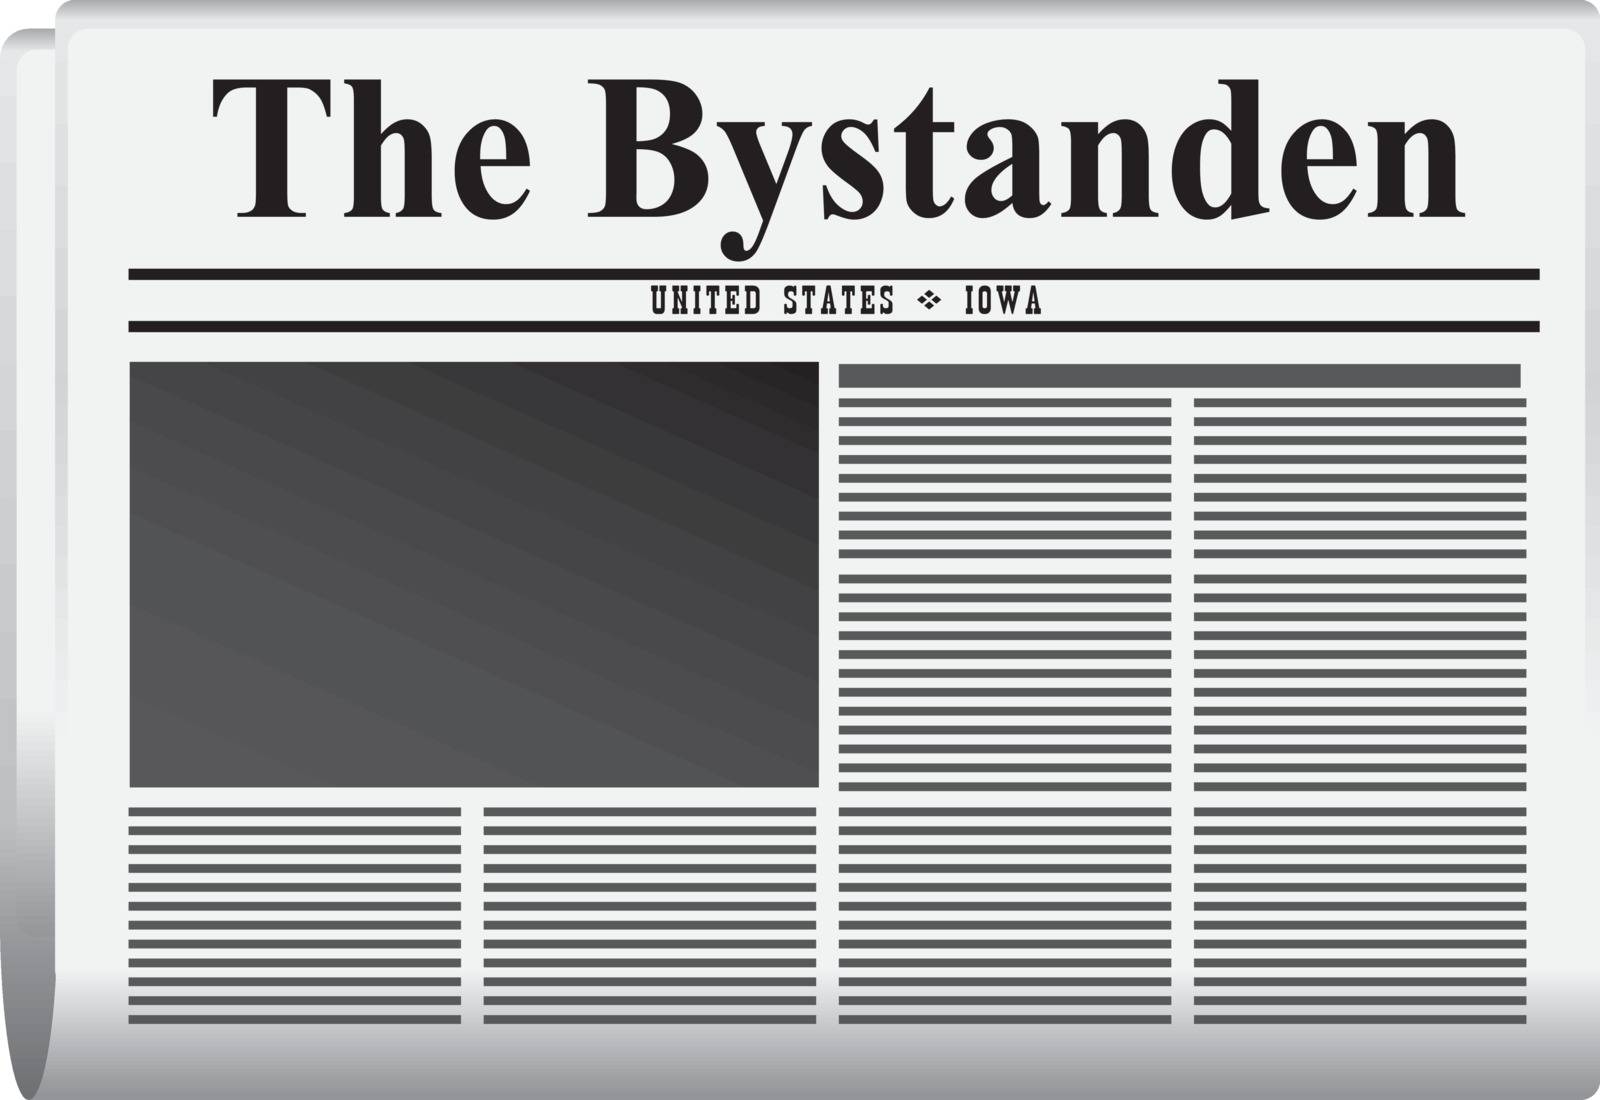 Newspaper for the state of Iowa, United States - newspaper The Bystander